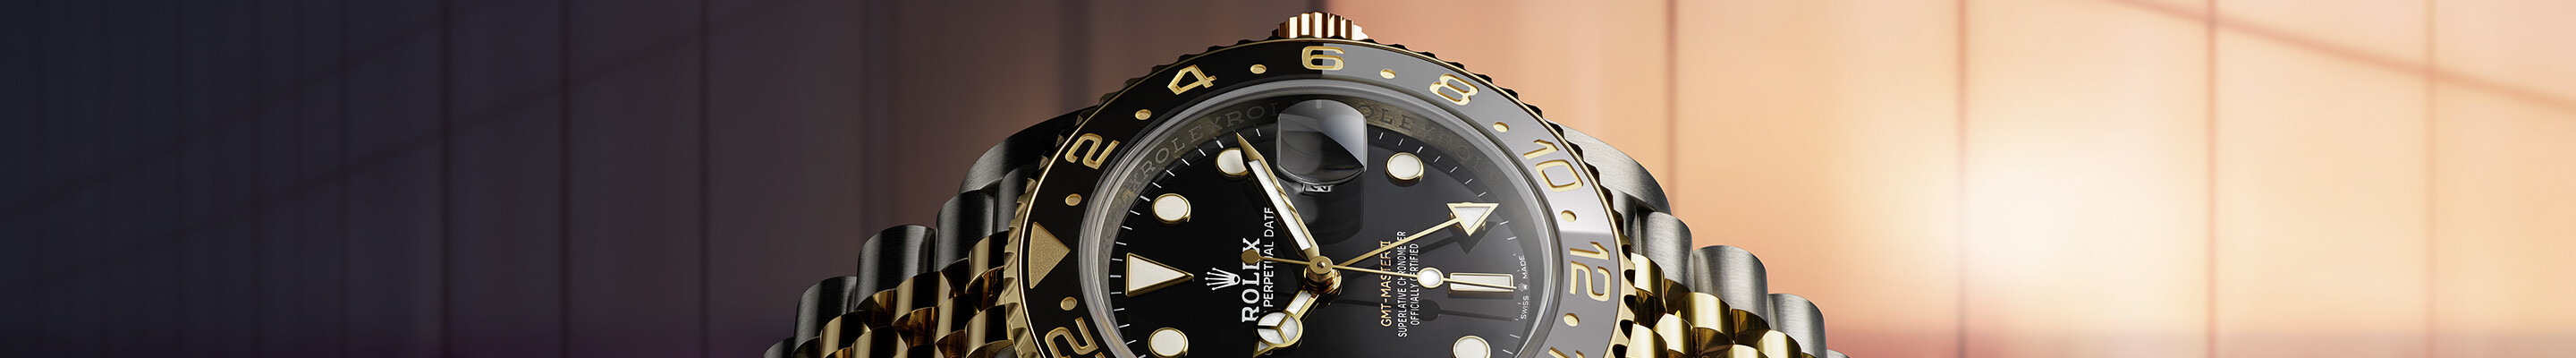 Rolex GMT-Master II at ACRE